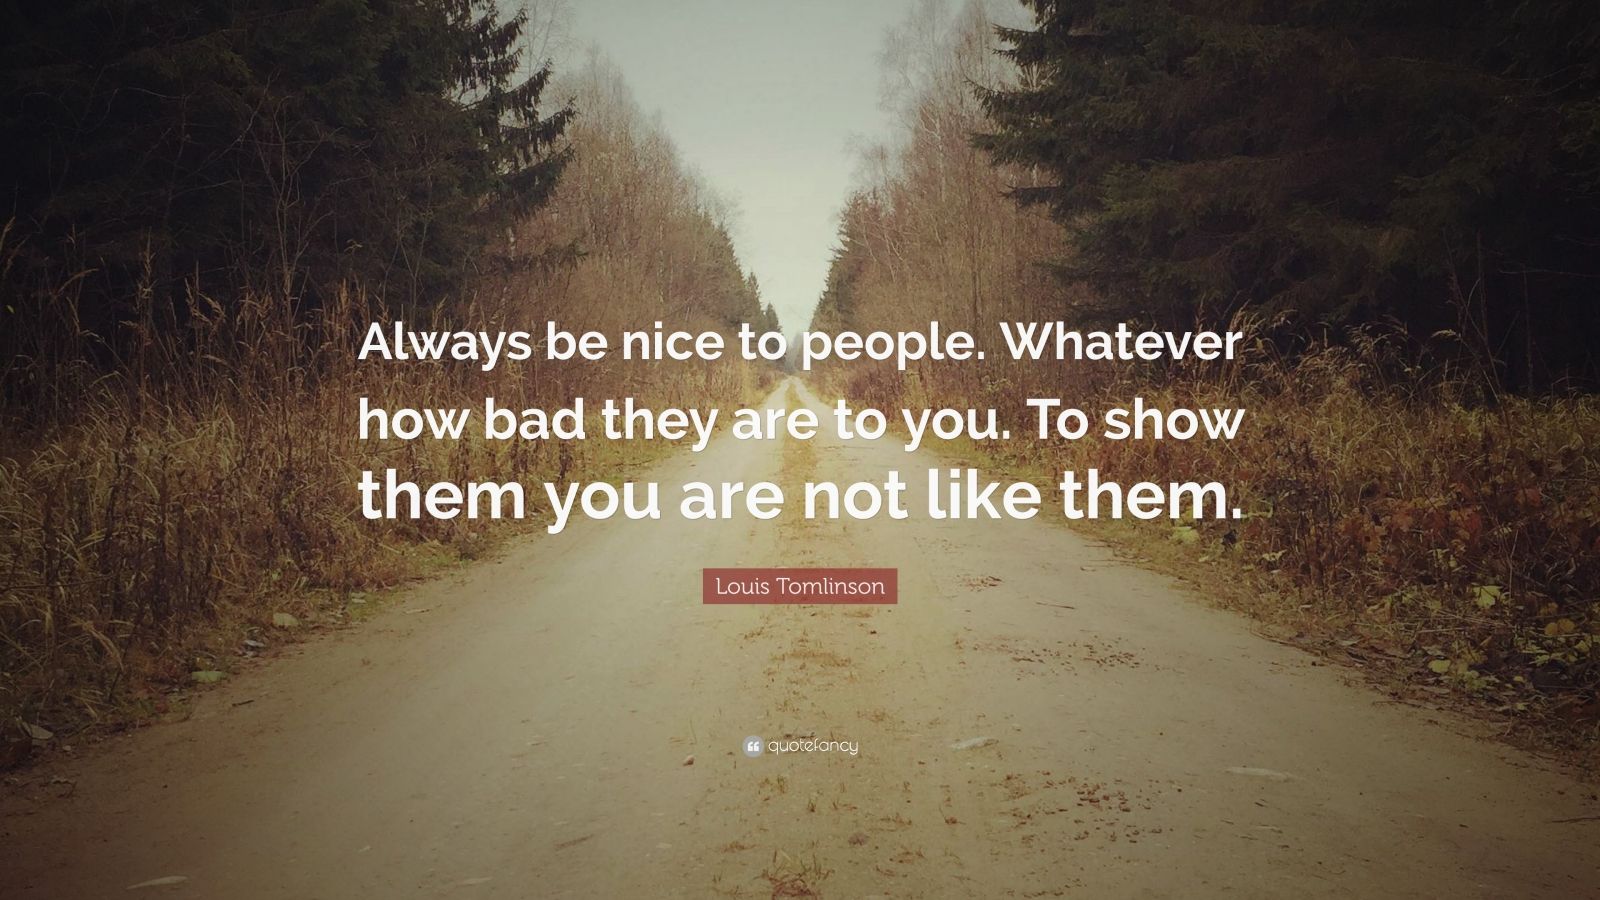 Louis Tomlinson Quote: “Always be nice to people. Whatever how bad they ...